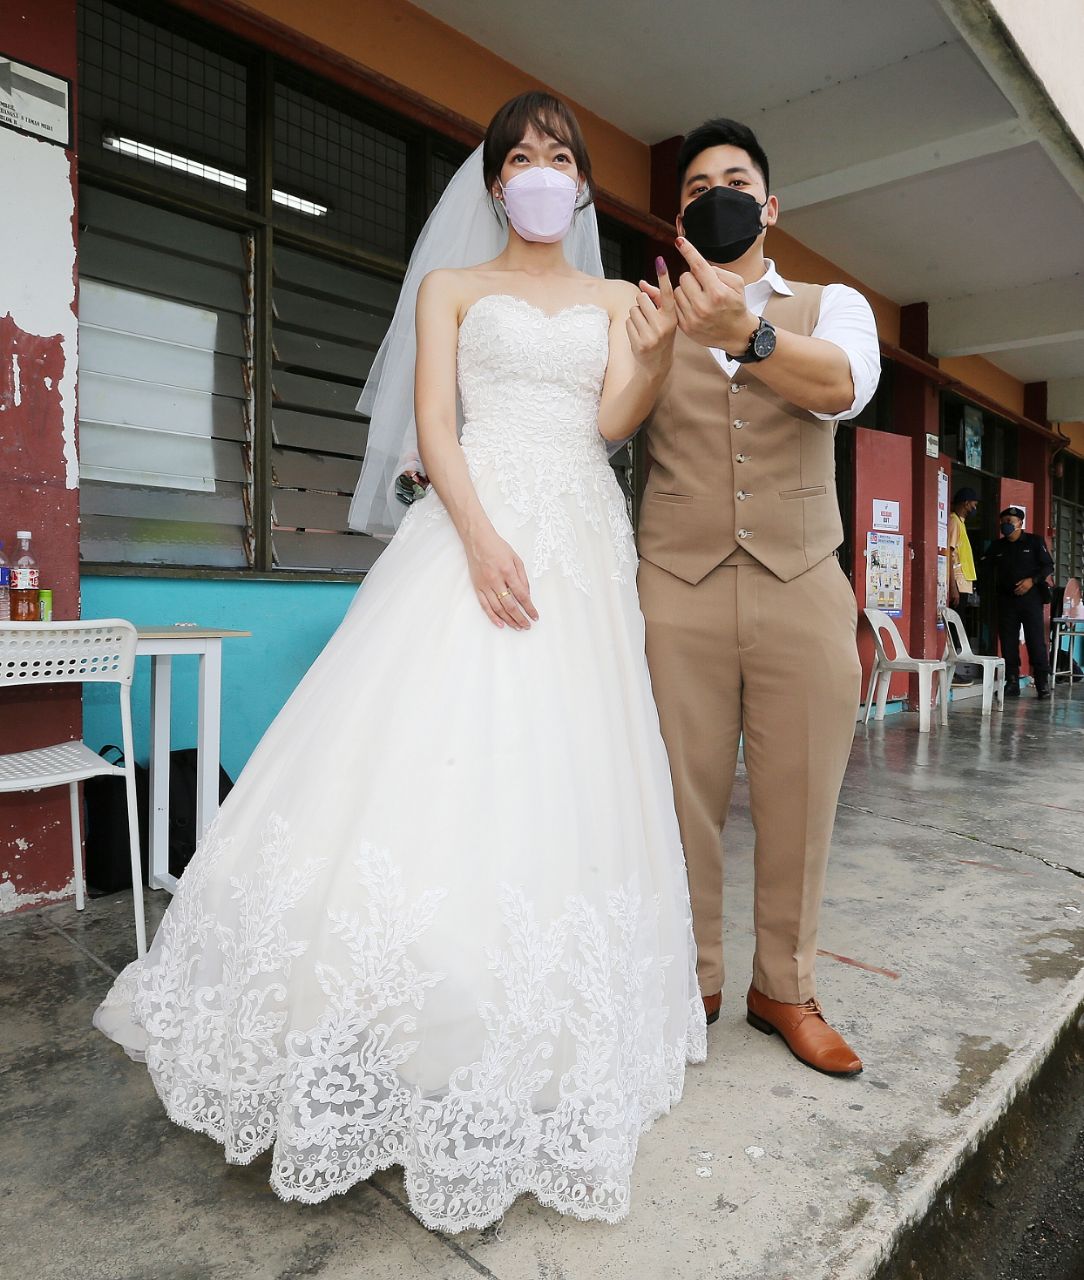 The presence of Lee Choy Yoong and her groom Jackie Har, 30, both 30, at the SK Taman Muda polling centre turned heads as they arrived in their wedding outfits. - NSTP/SAIFULLIZAN TAMADI